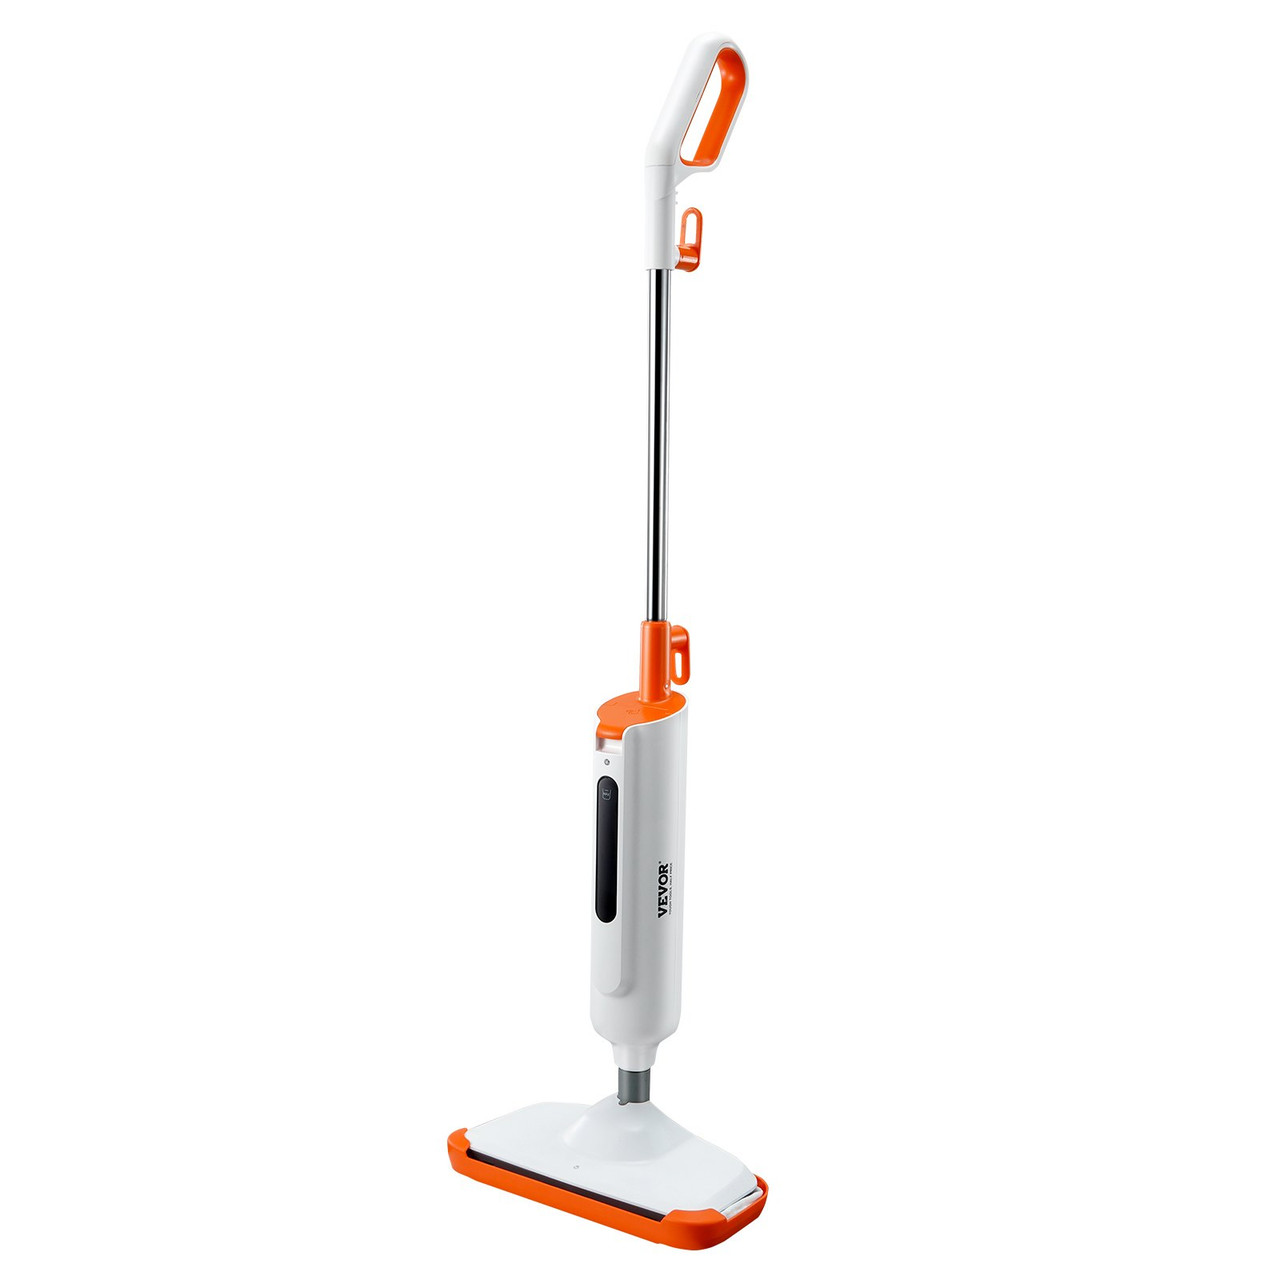 Steam Mop, 2-in-1 Hard Wood Floor Cleaner for Various Hard Floors, Like Ceramic, Granite, Marble, Linoleum, Natural Floor Mop with 2 pcs Machine Washable Pads and A Water Tank